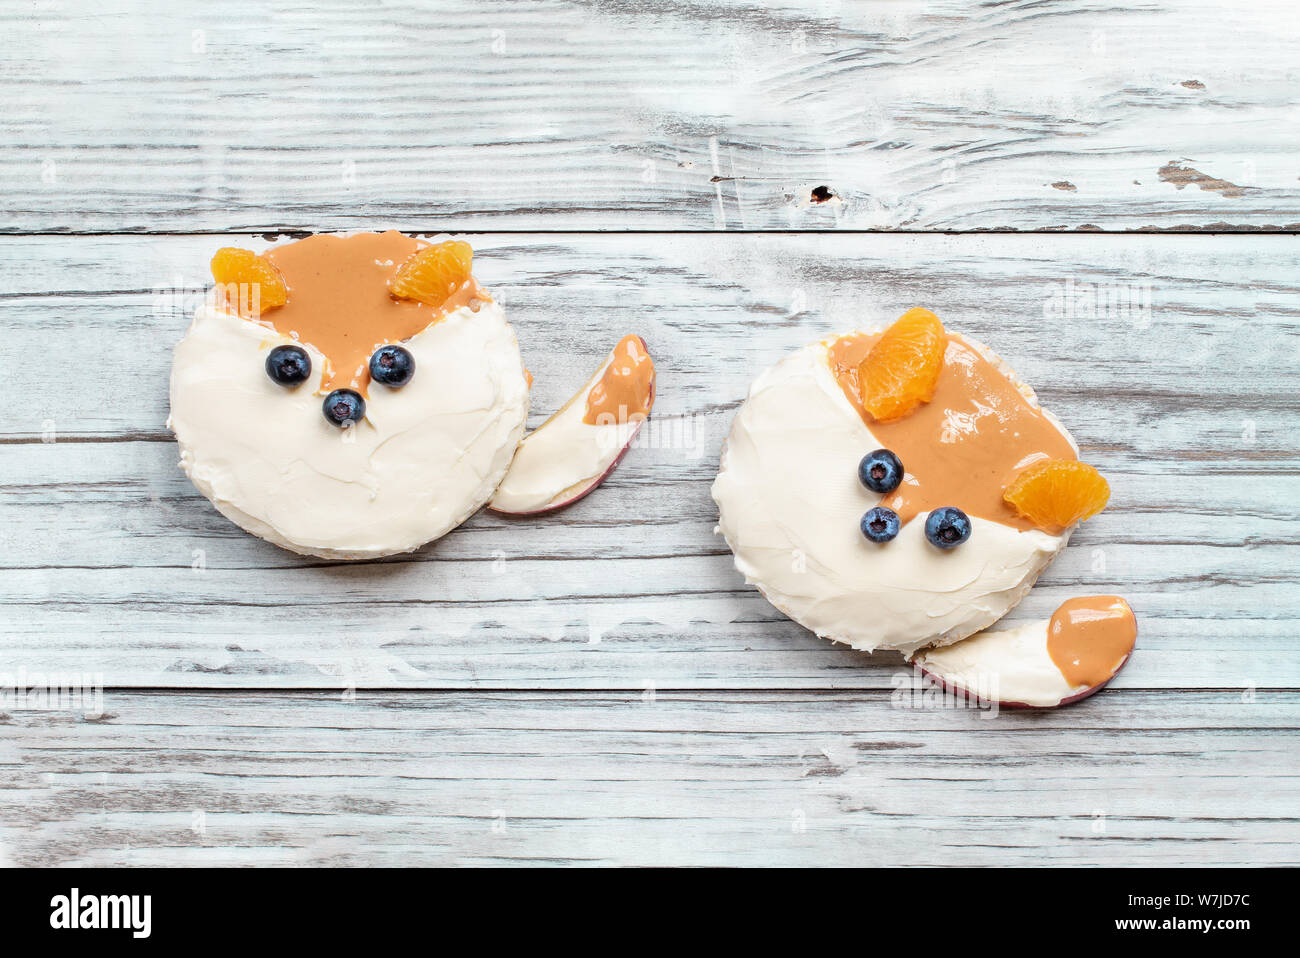 Fun food for kids. Rice cakes in the shape of foxes lying on a rustic white table. Fox is made from cream cheese, peanut butter, apple slices, oranges Stock Photo